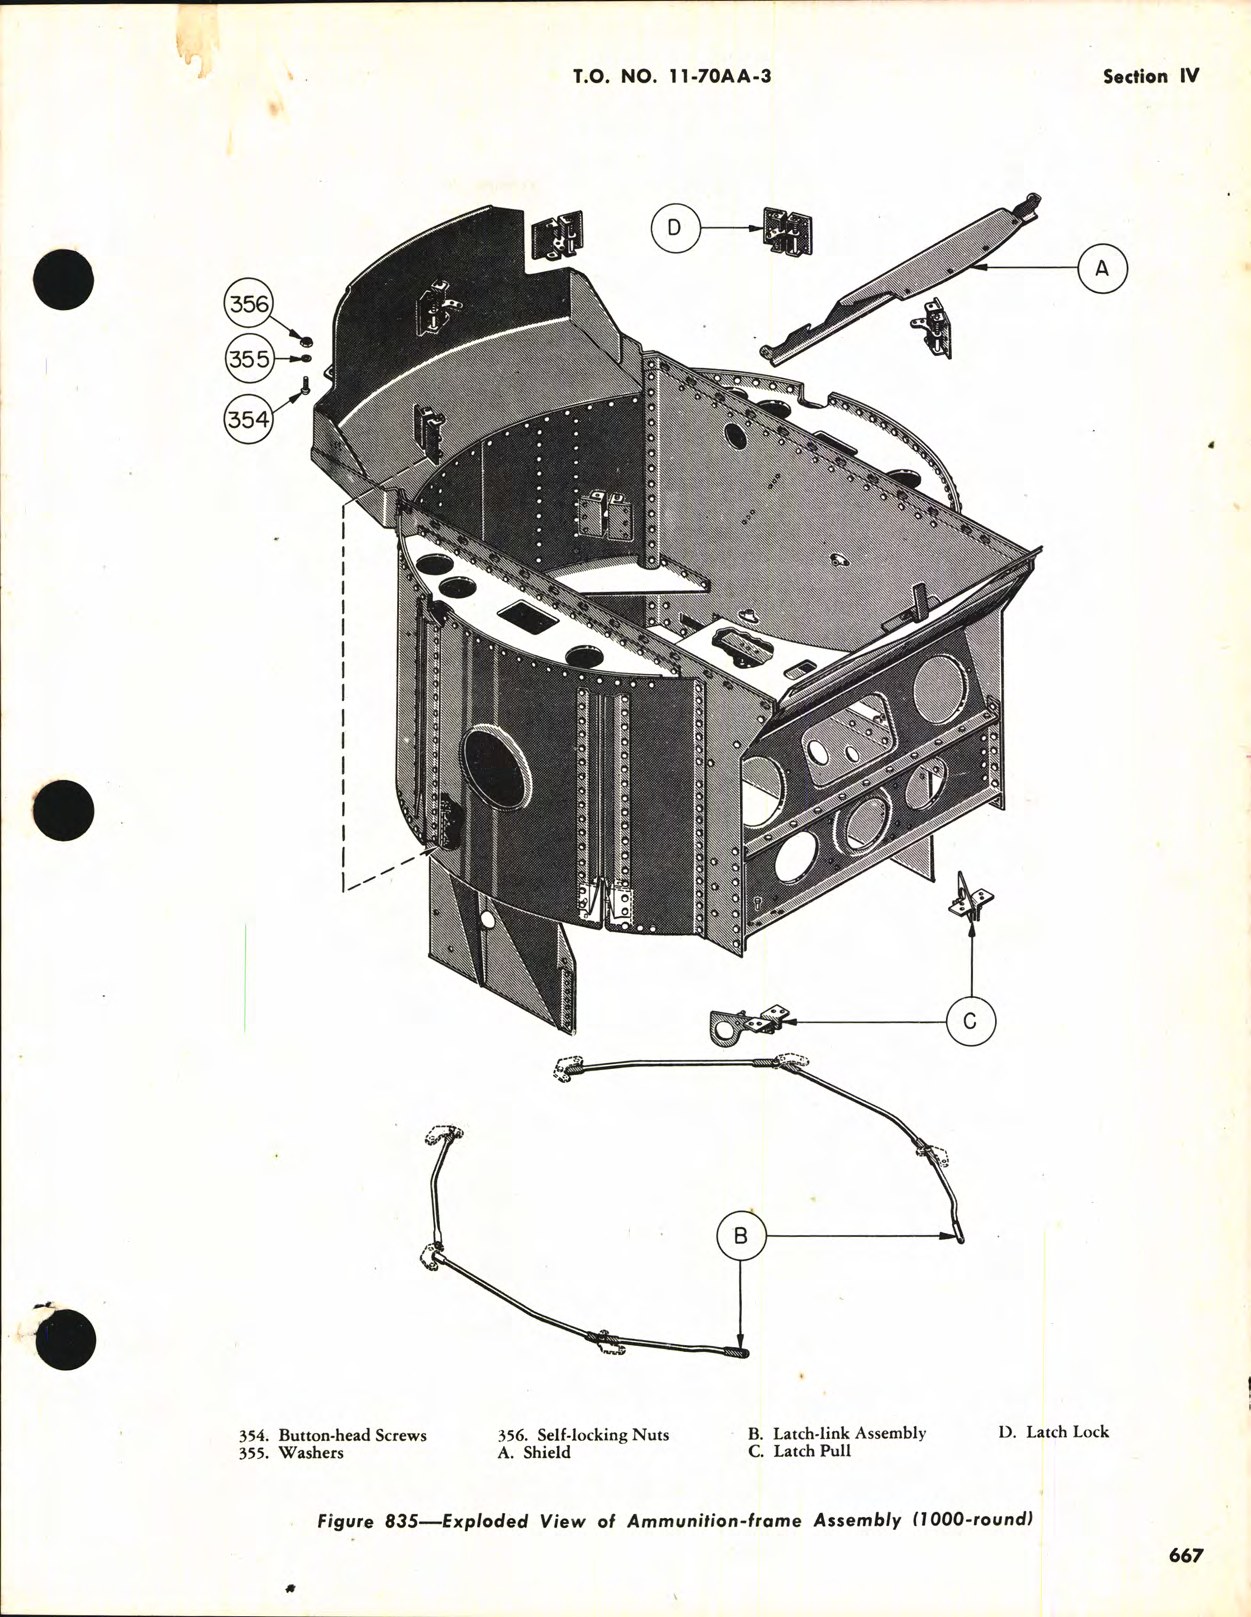 Sample page 5 from AirCorps Library document: Remote Control Turret Systems Models 2CFR55B1, B2, B4, C1, C2, D1, Y1, Y3, and Y4